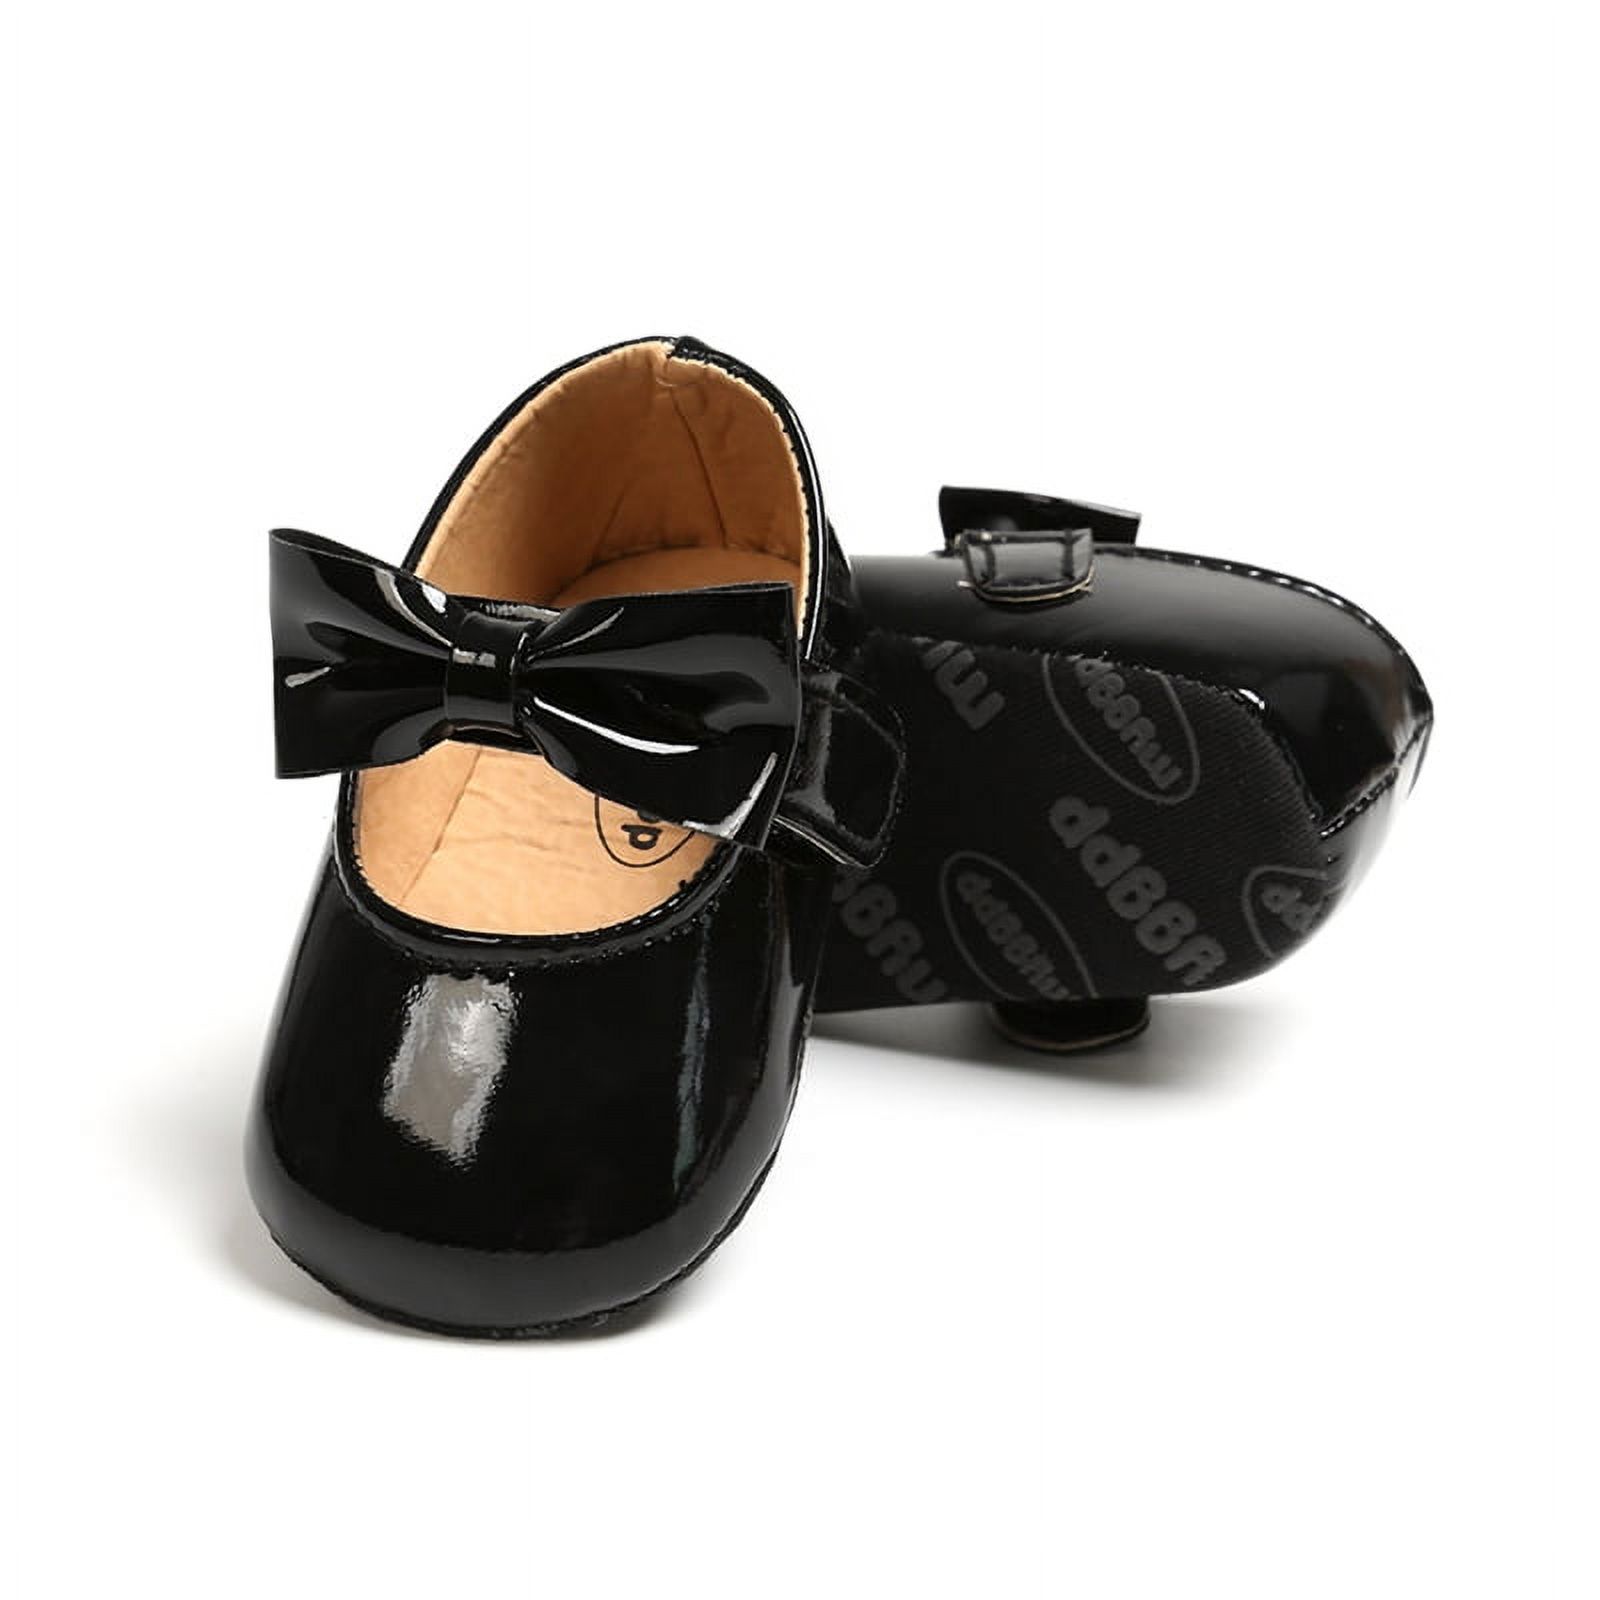 Infant Toddler Baby Girl's Soft Sole Anti-Slip Casual Shoes PU Leather Bowknot Princess Shoes - image 3 of 7